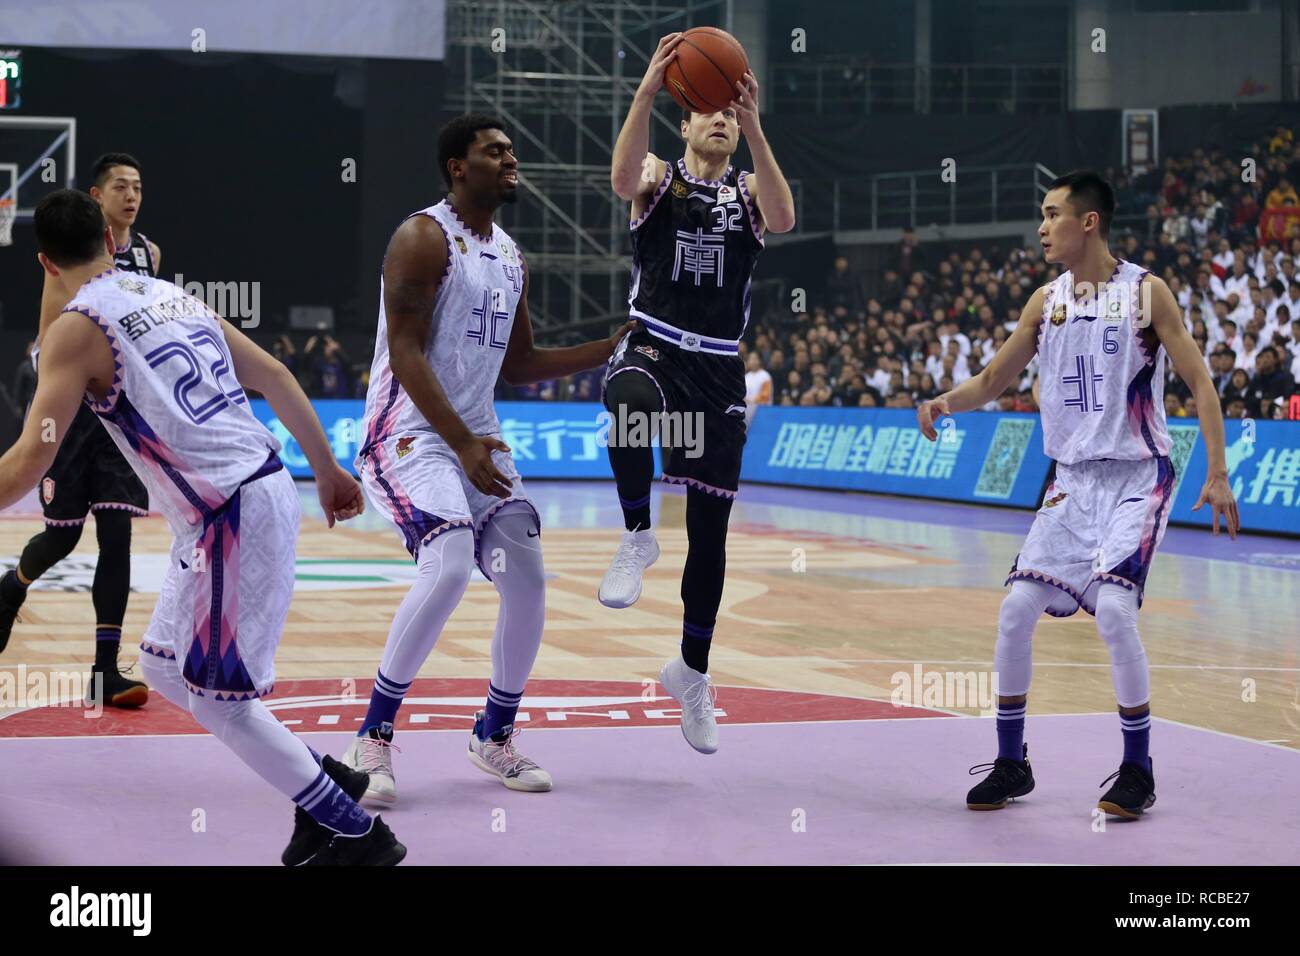 Qingdao, Qingdao, China. 15th Jan, 2019. Qingdao, CHINA-The CBA All Star  Weekend 2019 is held in Qingdao, east ChinaÃ¢â‚¬â„¢s Shandong Province. The  South Stars Team defeats North Stars 160-145. Chinese basketball players